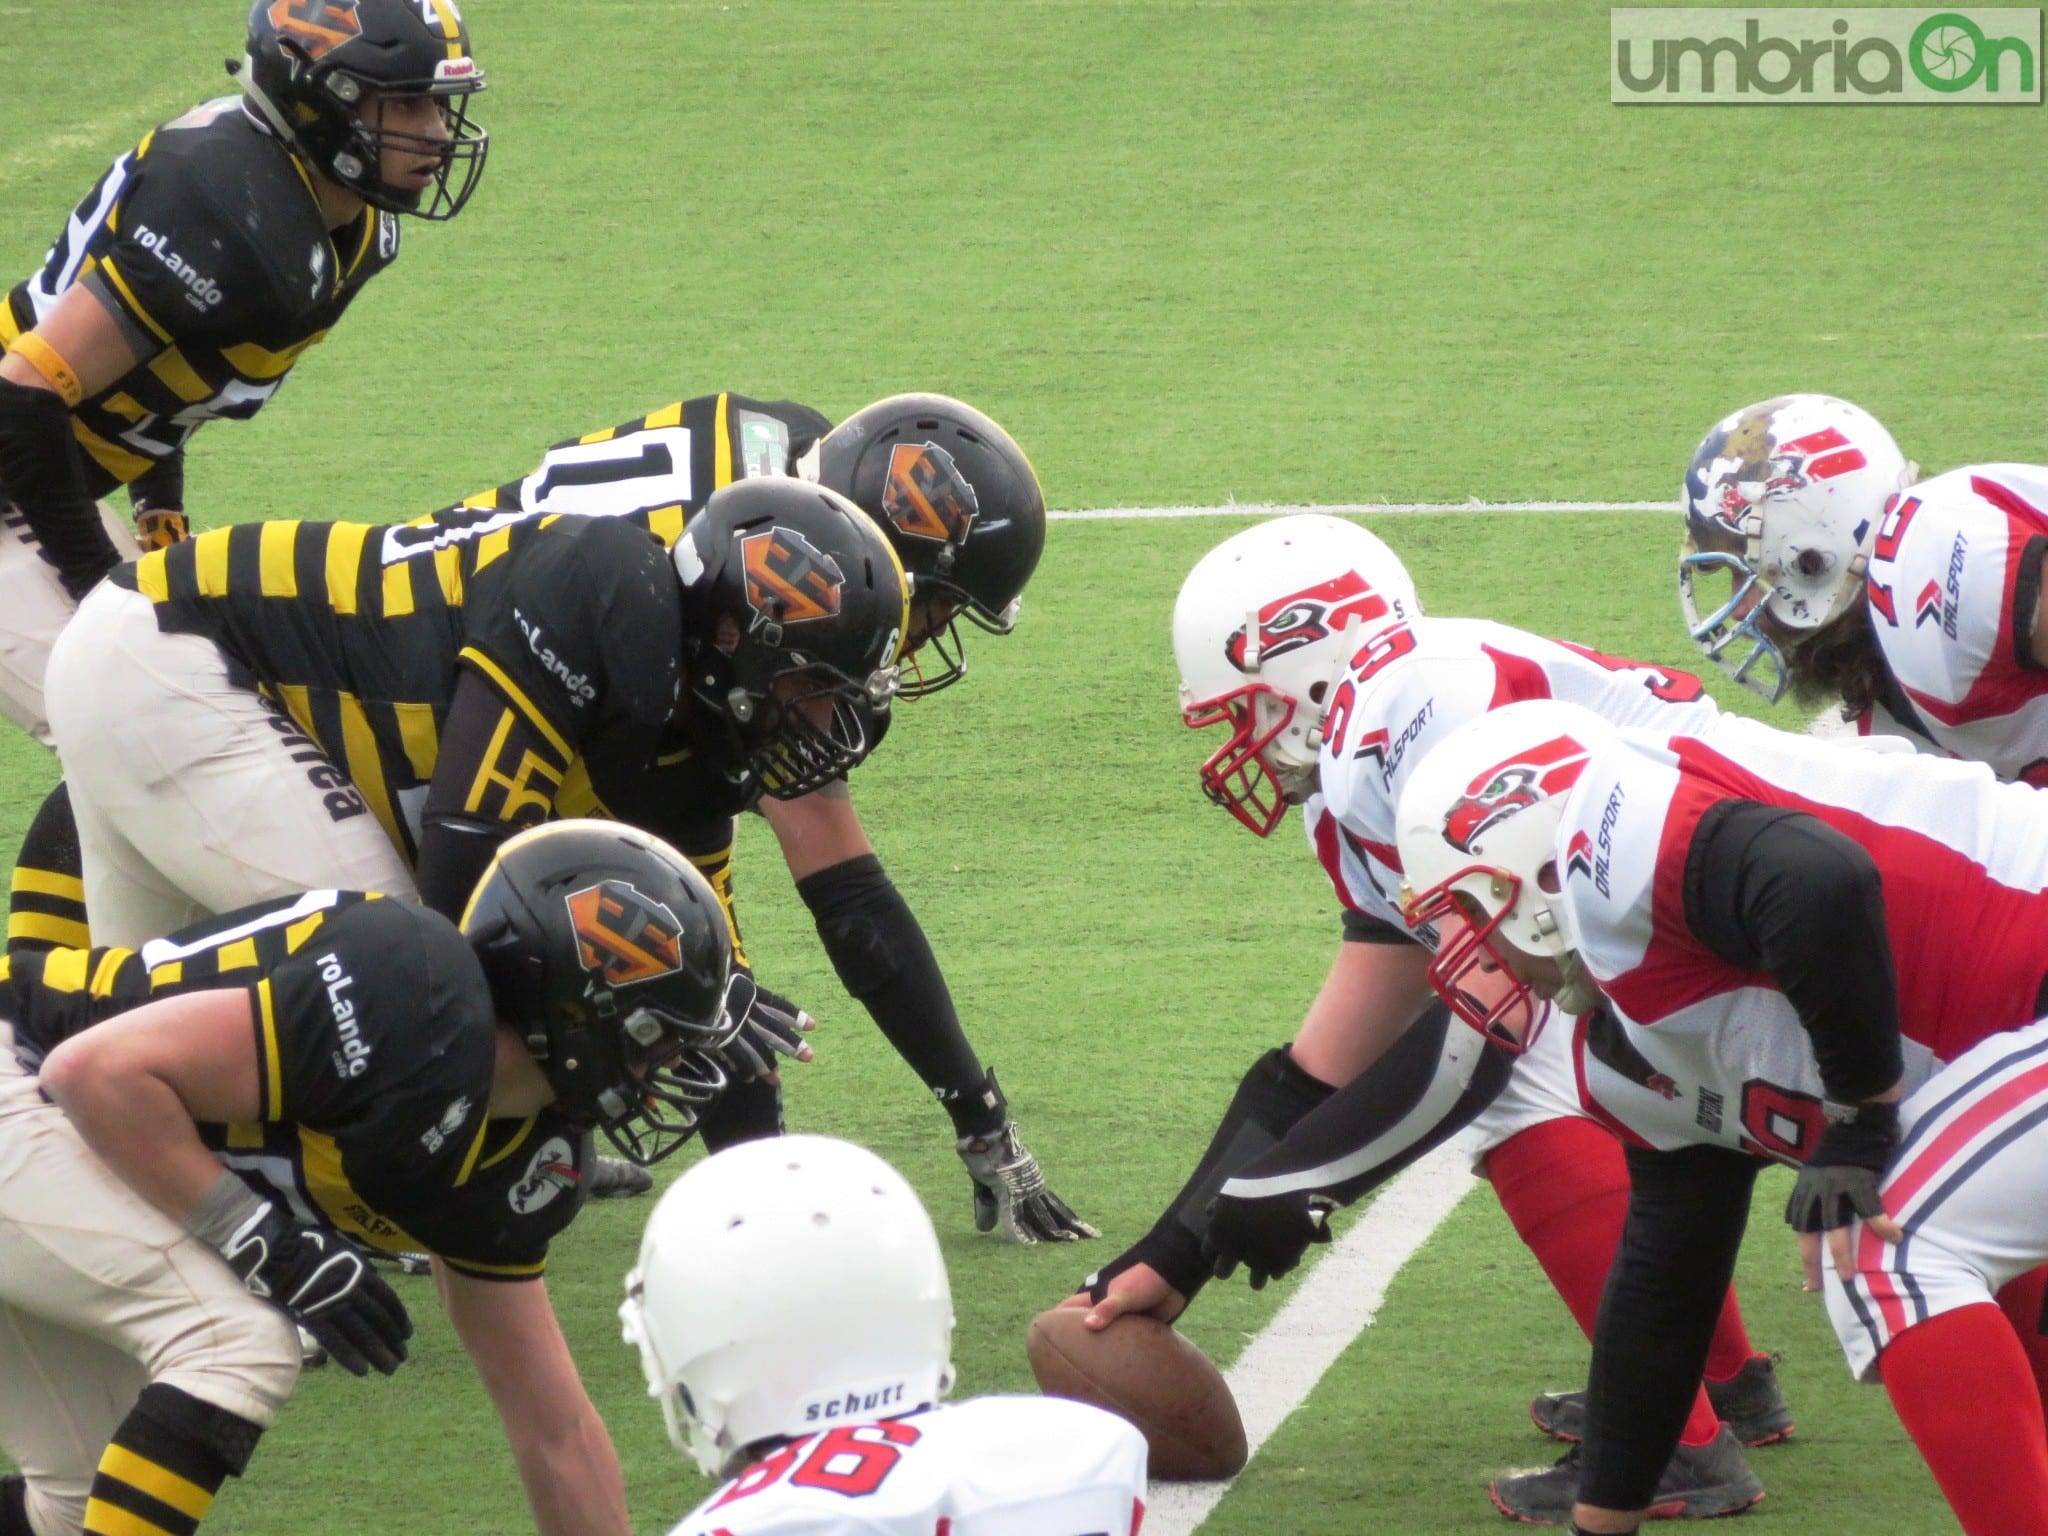 steelers grifoni football78 | umbriaON